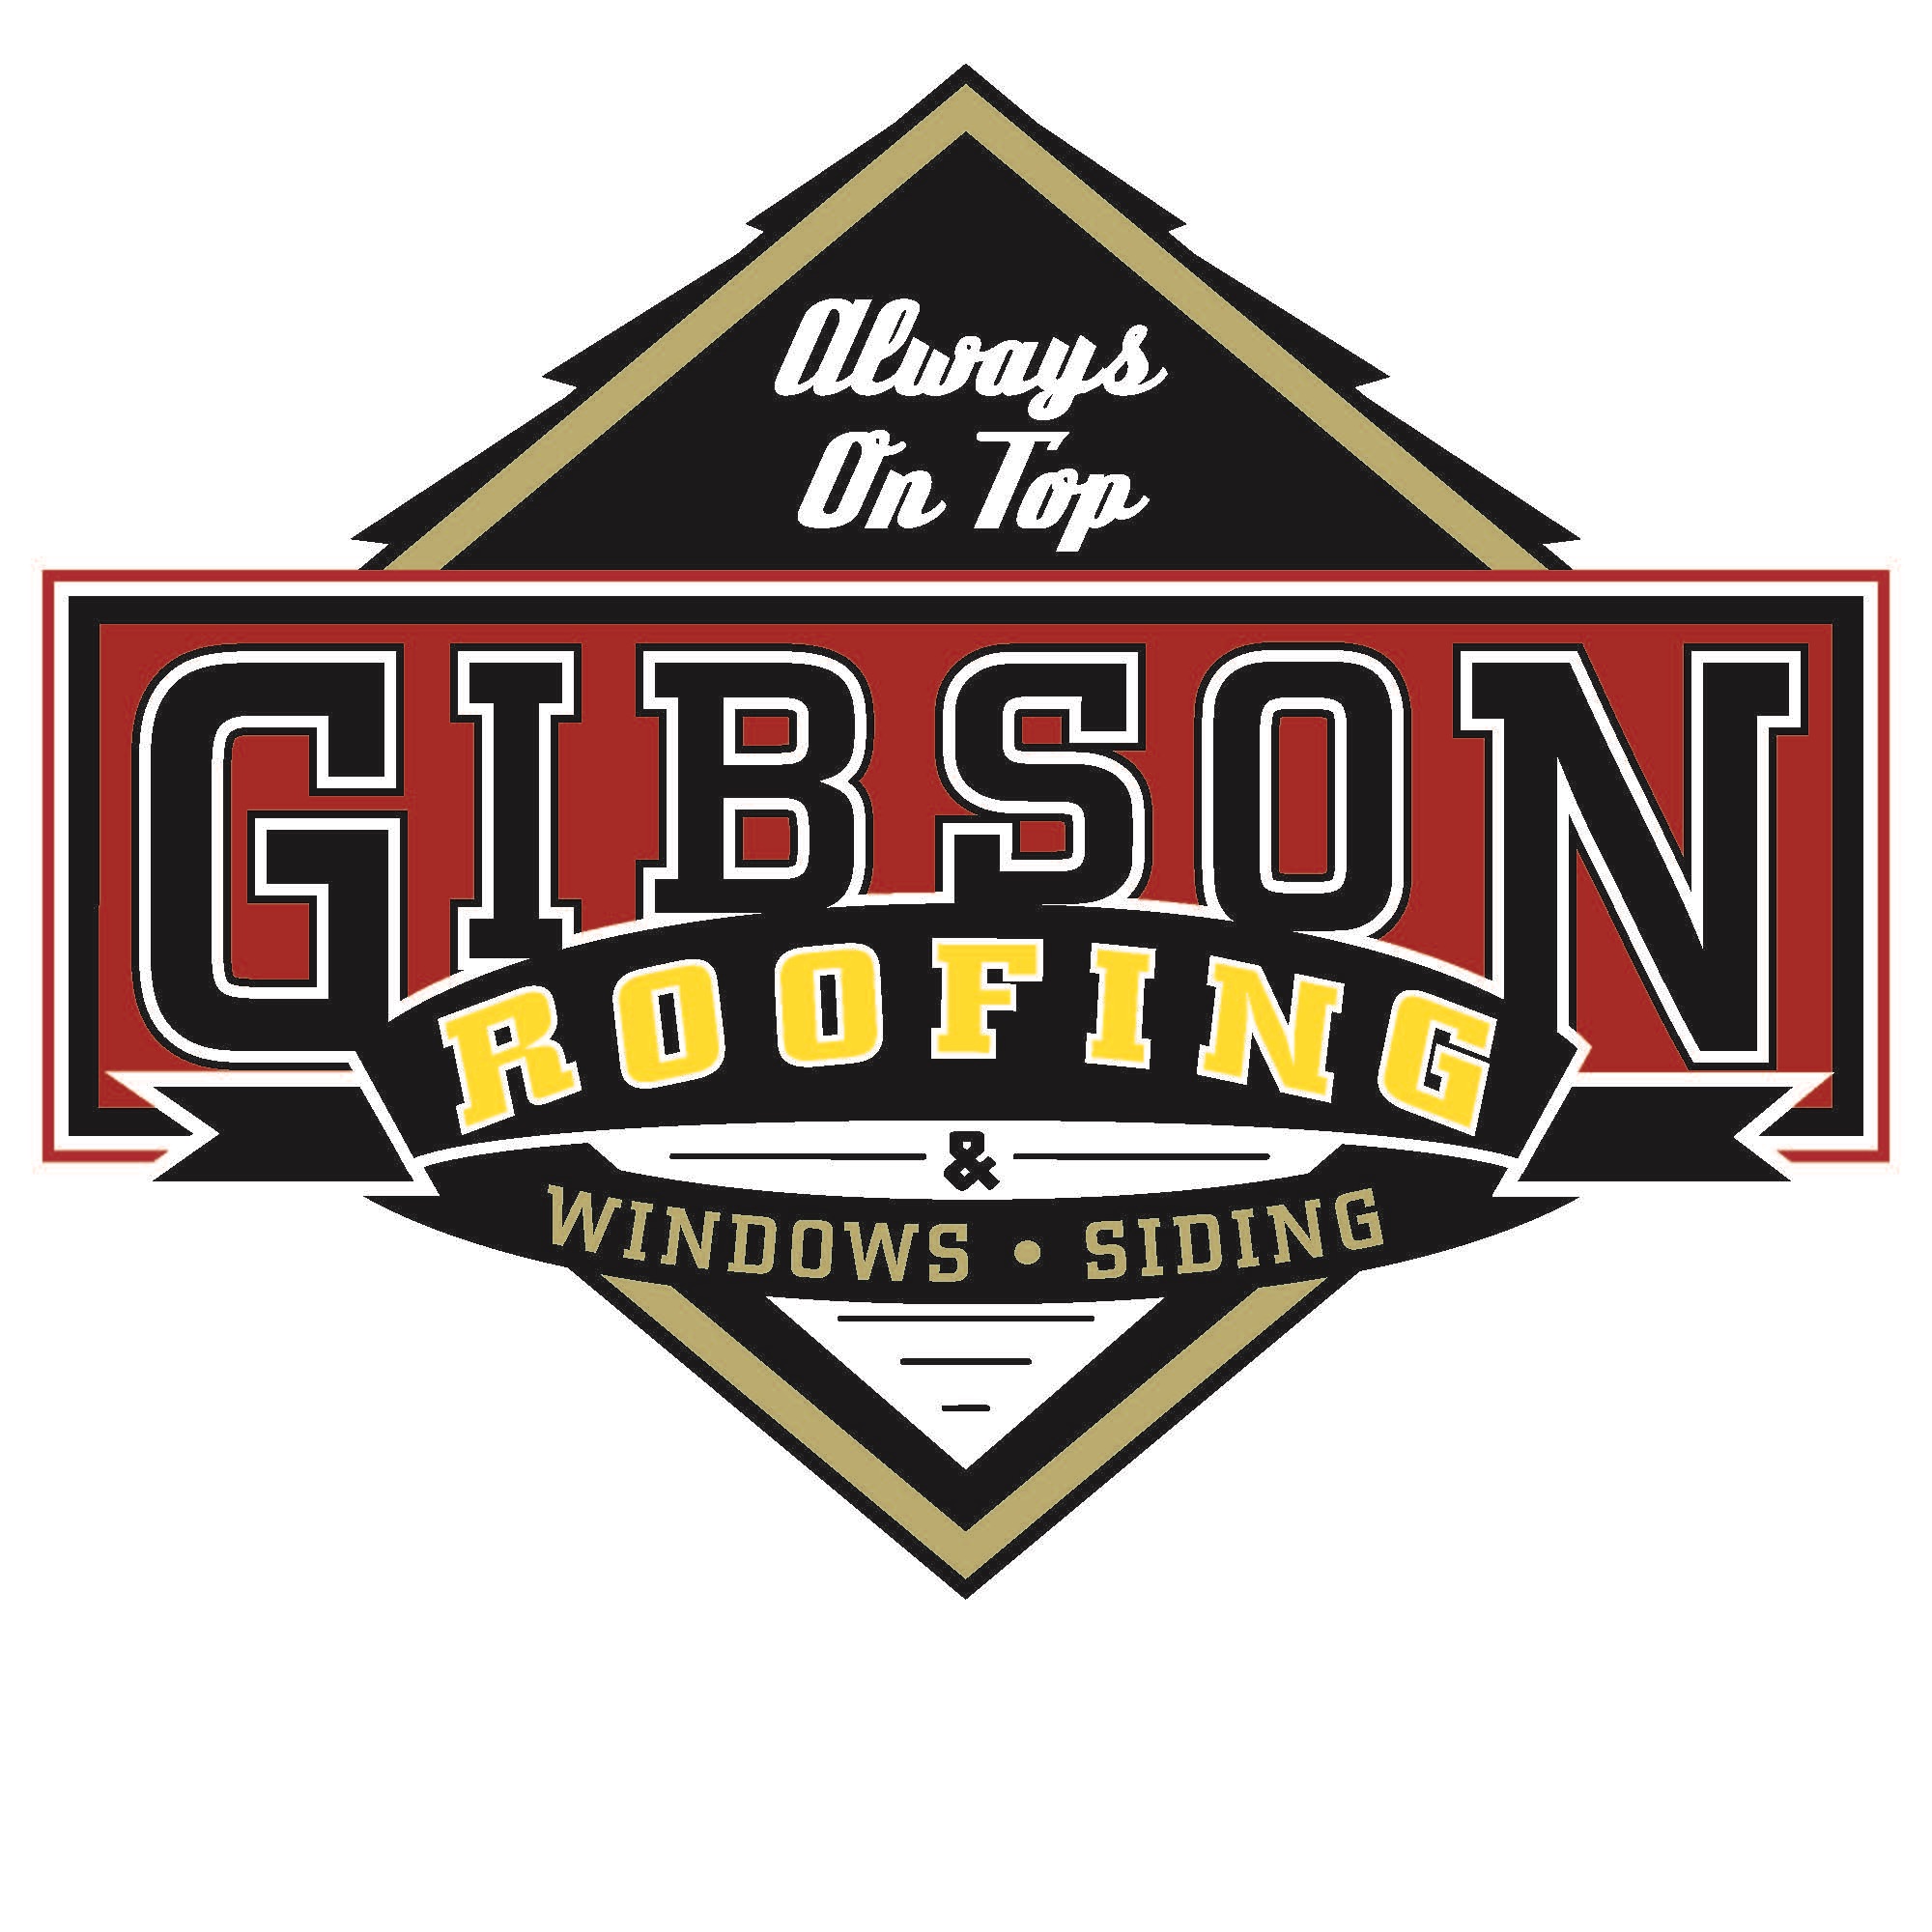 Gibson Roofing Logo